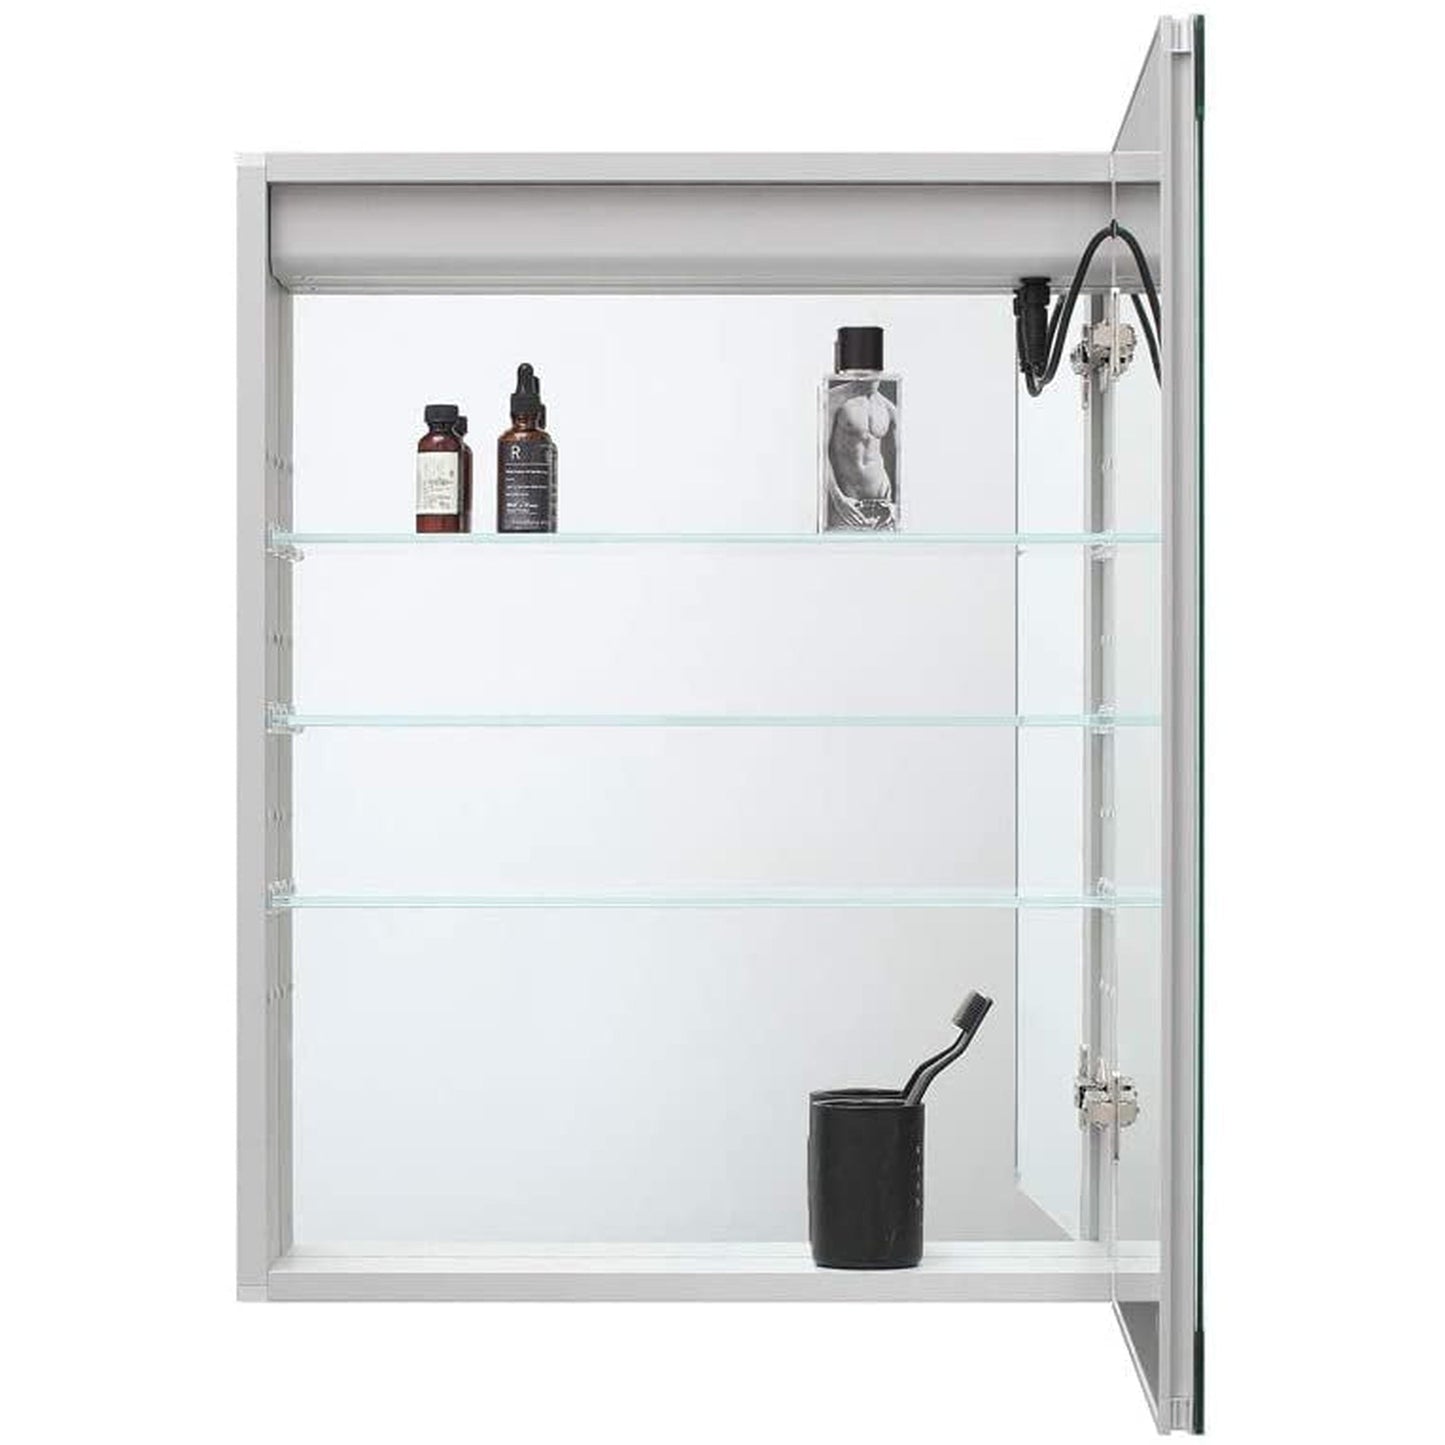 Aquadom Royale Basic 24" x 30" Single View Rectangle Right Hinged Recessed or Surface Mount Medicine Cabinet With LED Lighting, Touch Screen Button, Dimmer